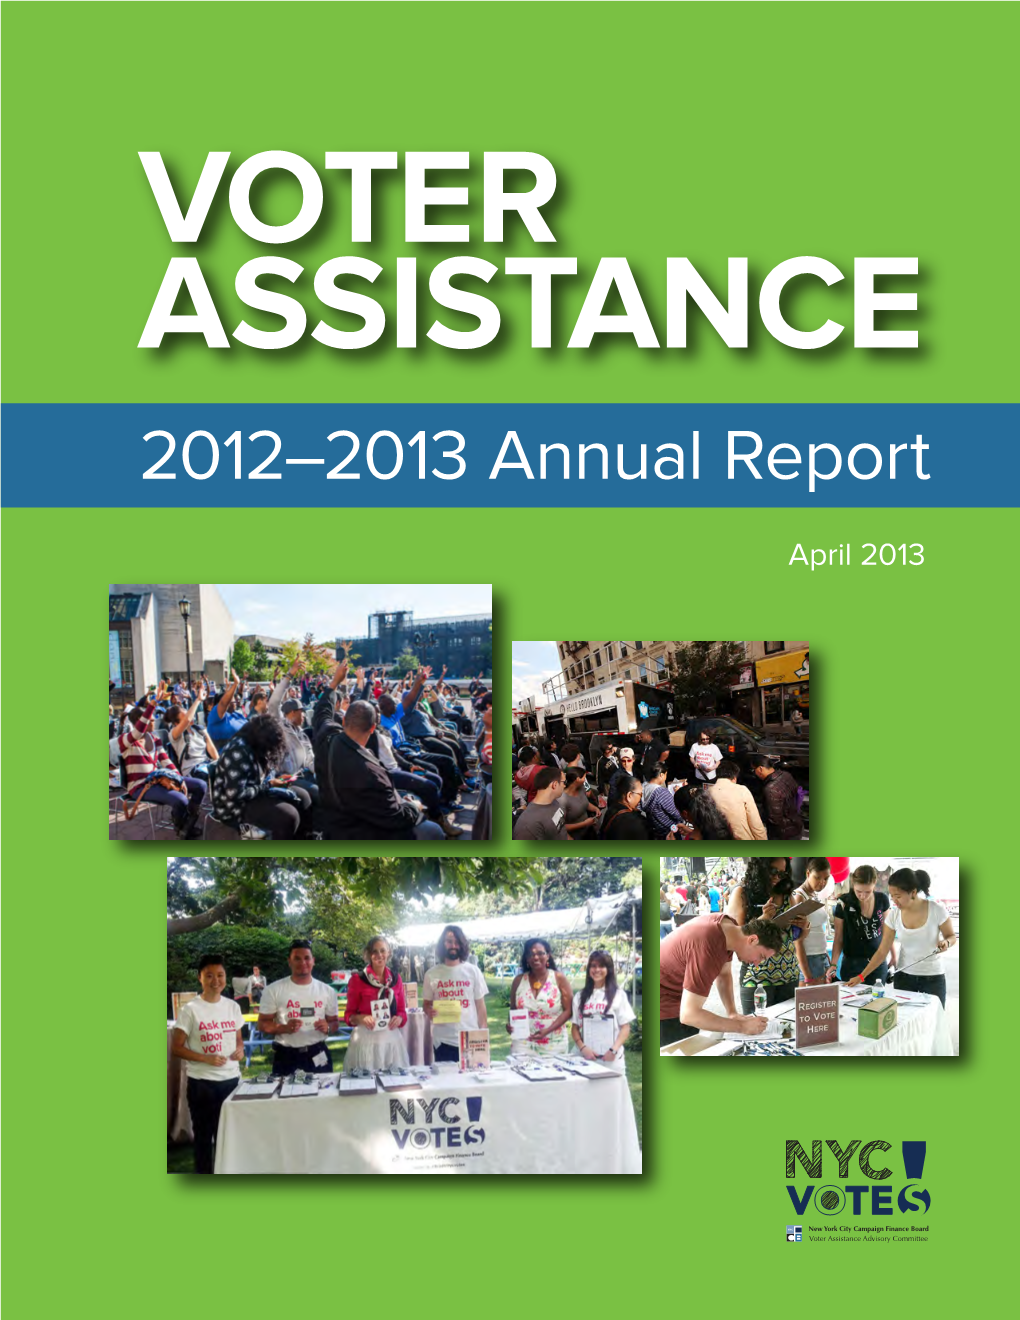 2012-2013 Voter Assistance Annual Report